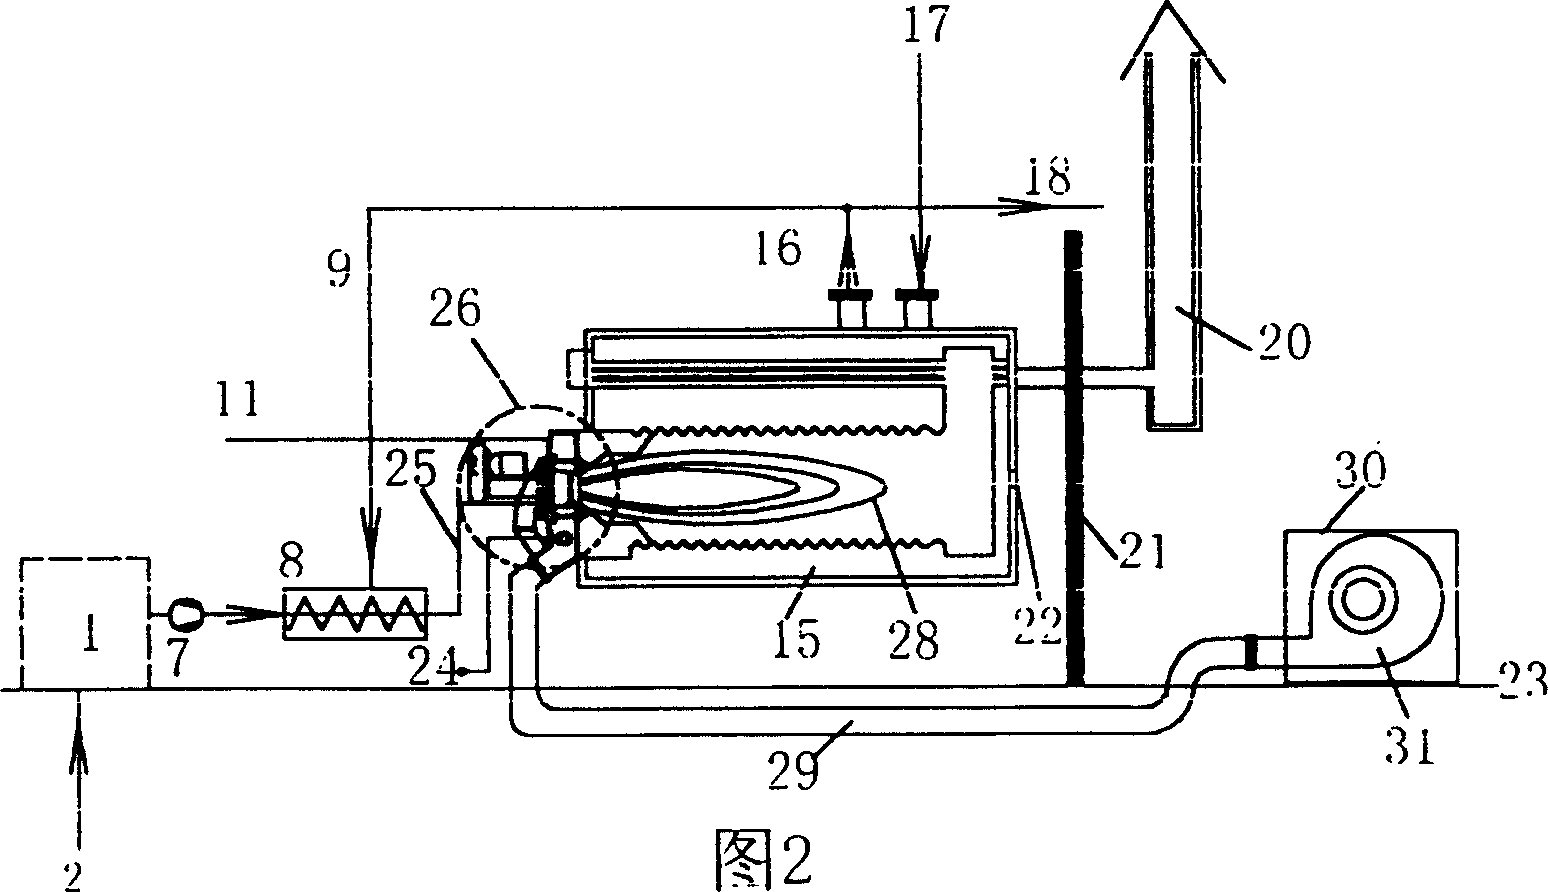 Burning ultra-thick oil by method of rotating cup atomization